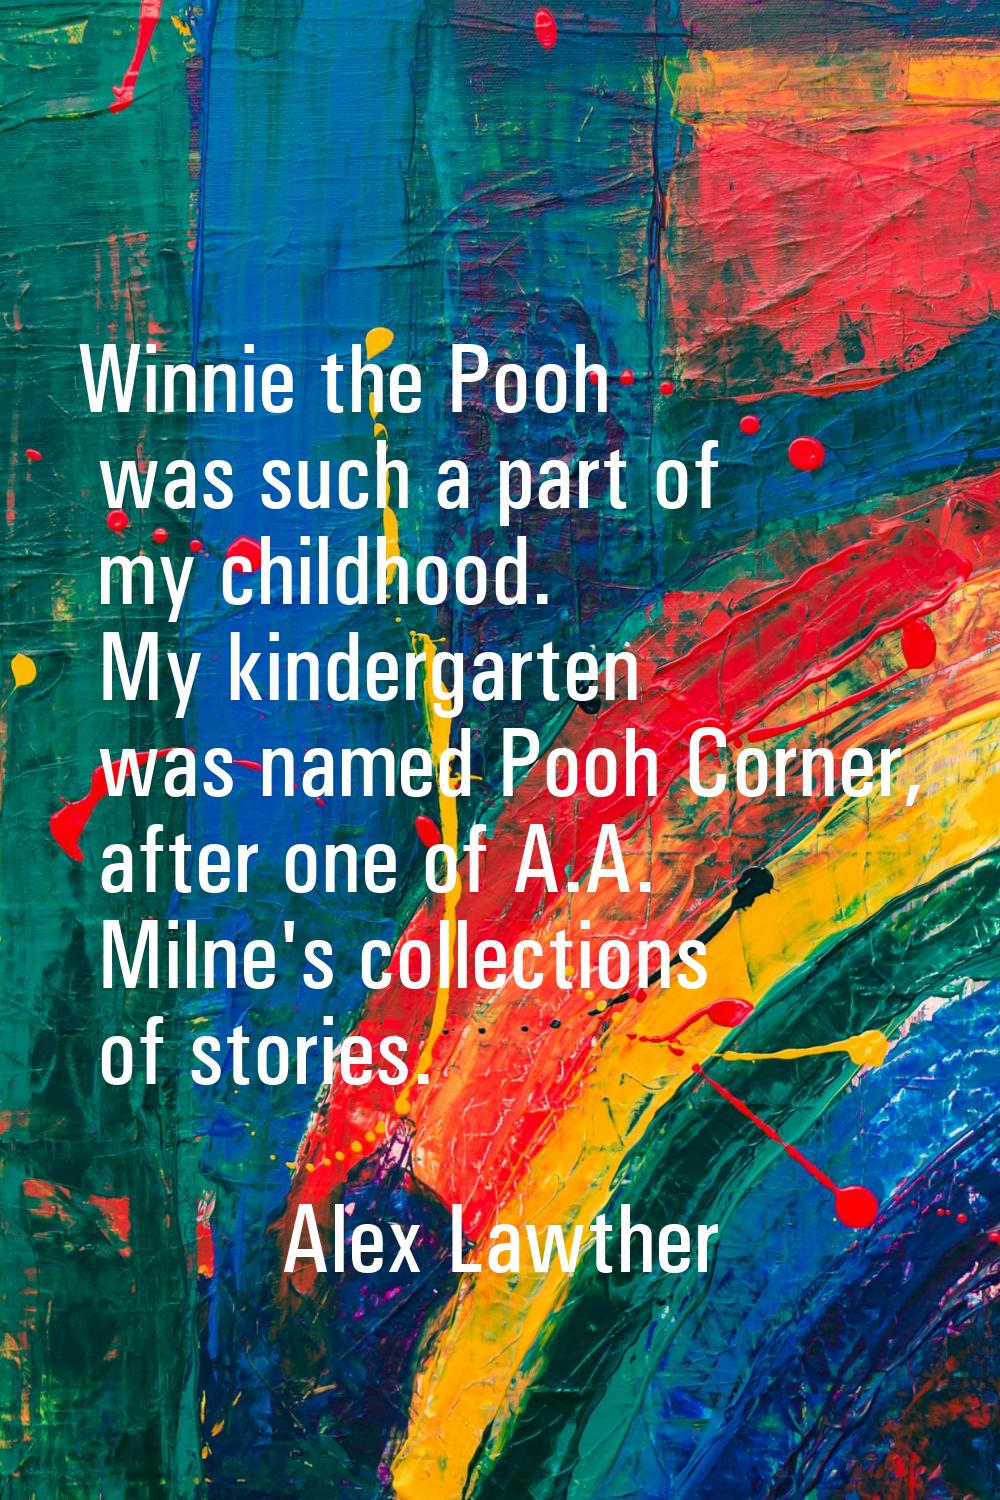 Winnie the Pooh was such a part of my childhood. My kindergarten was named Pooh Corner, after one o